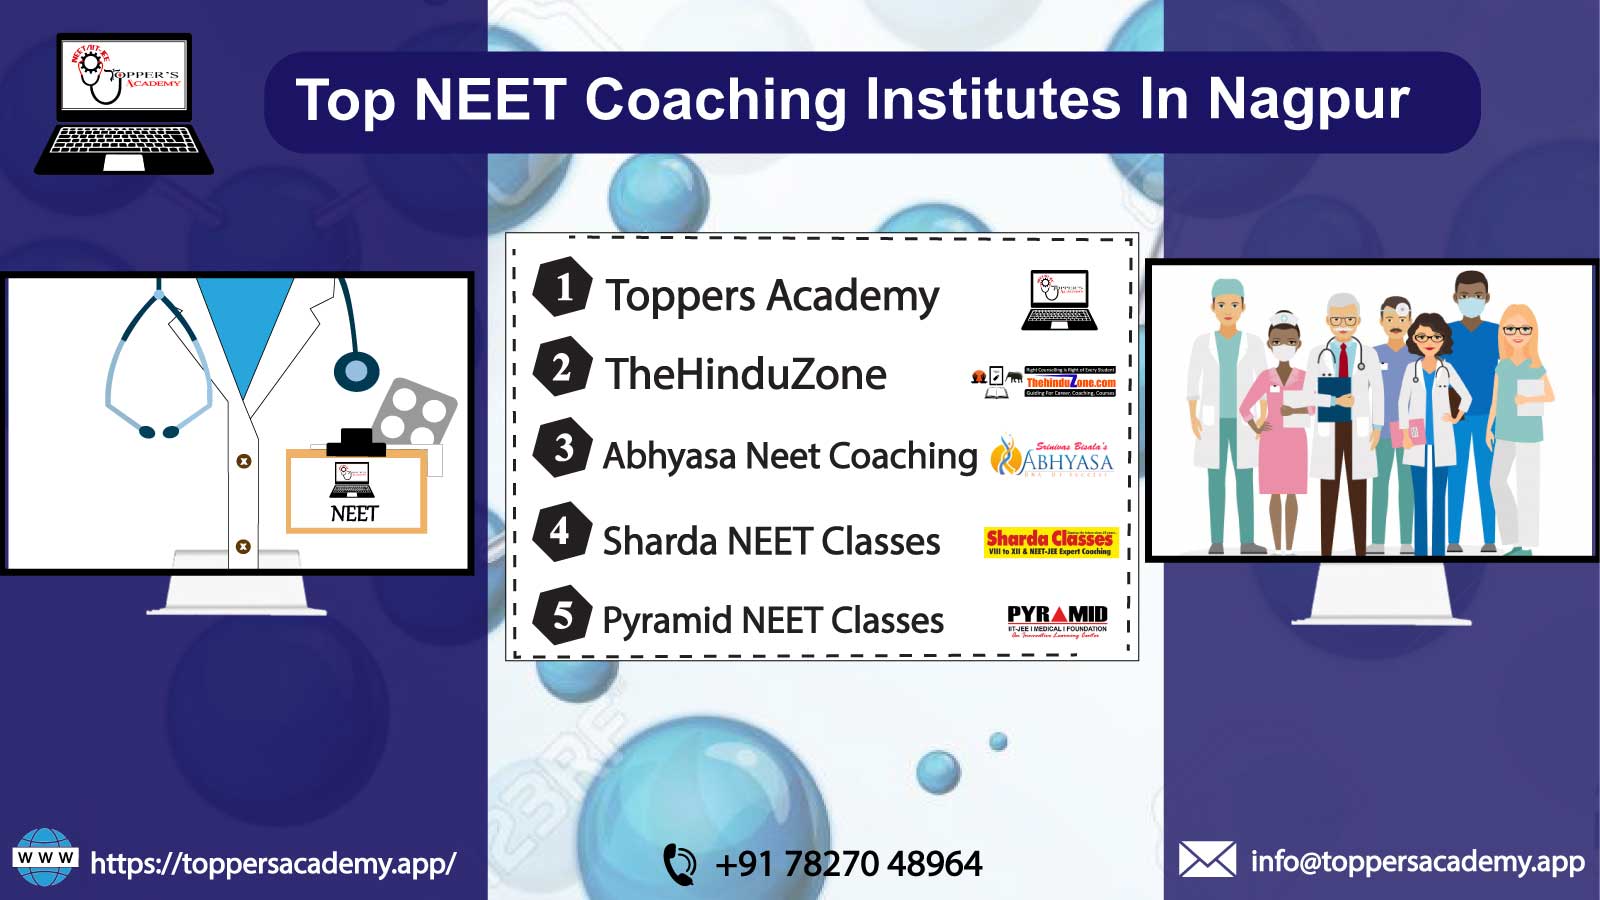 List Of The Top 10 Coaching Institute In Nagpur